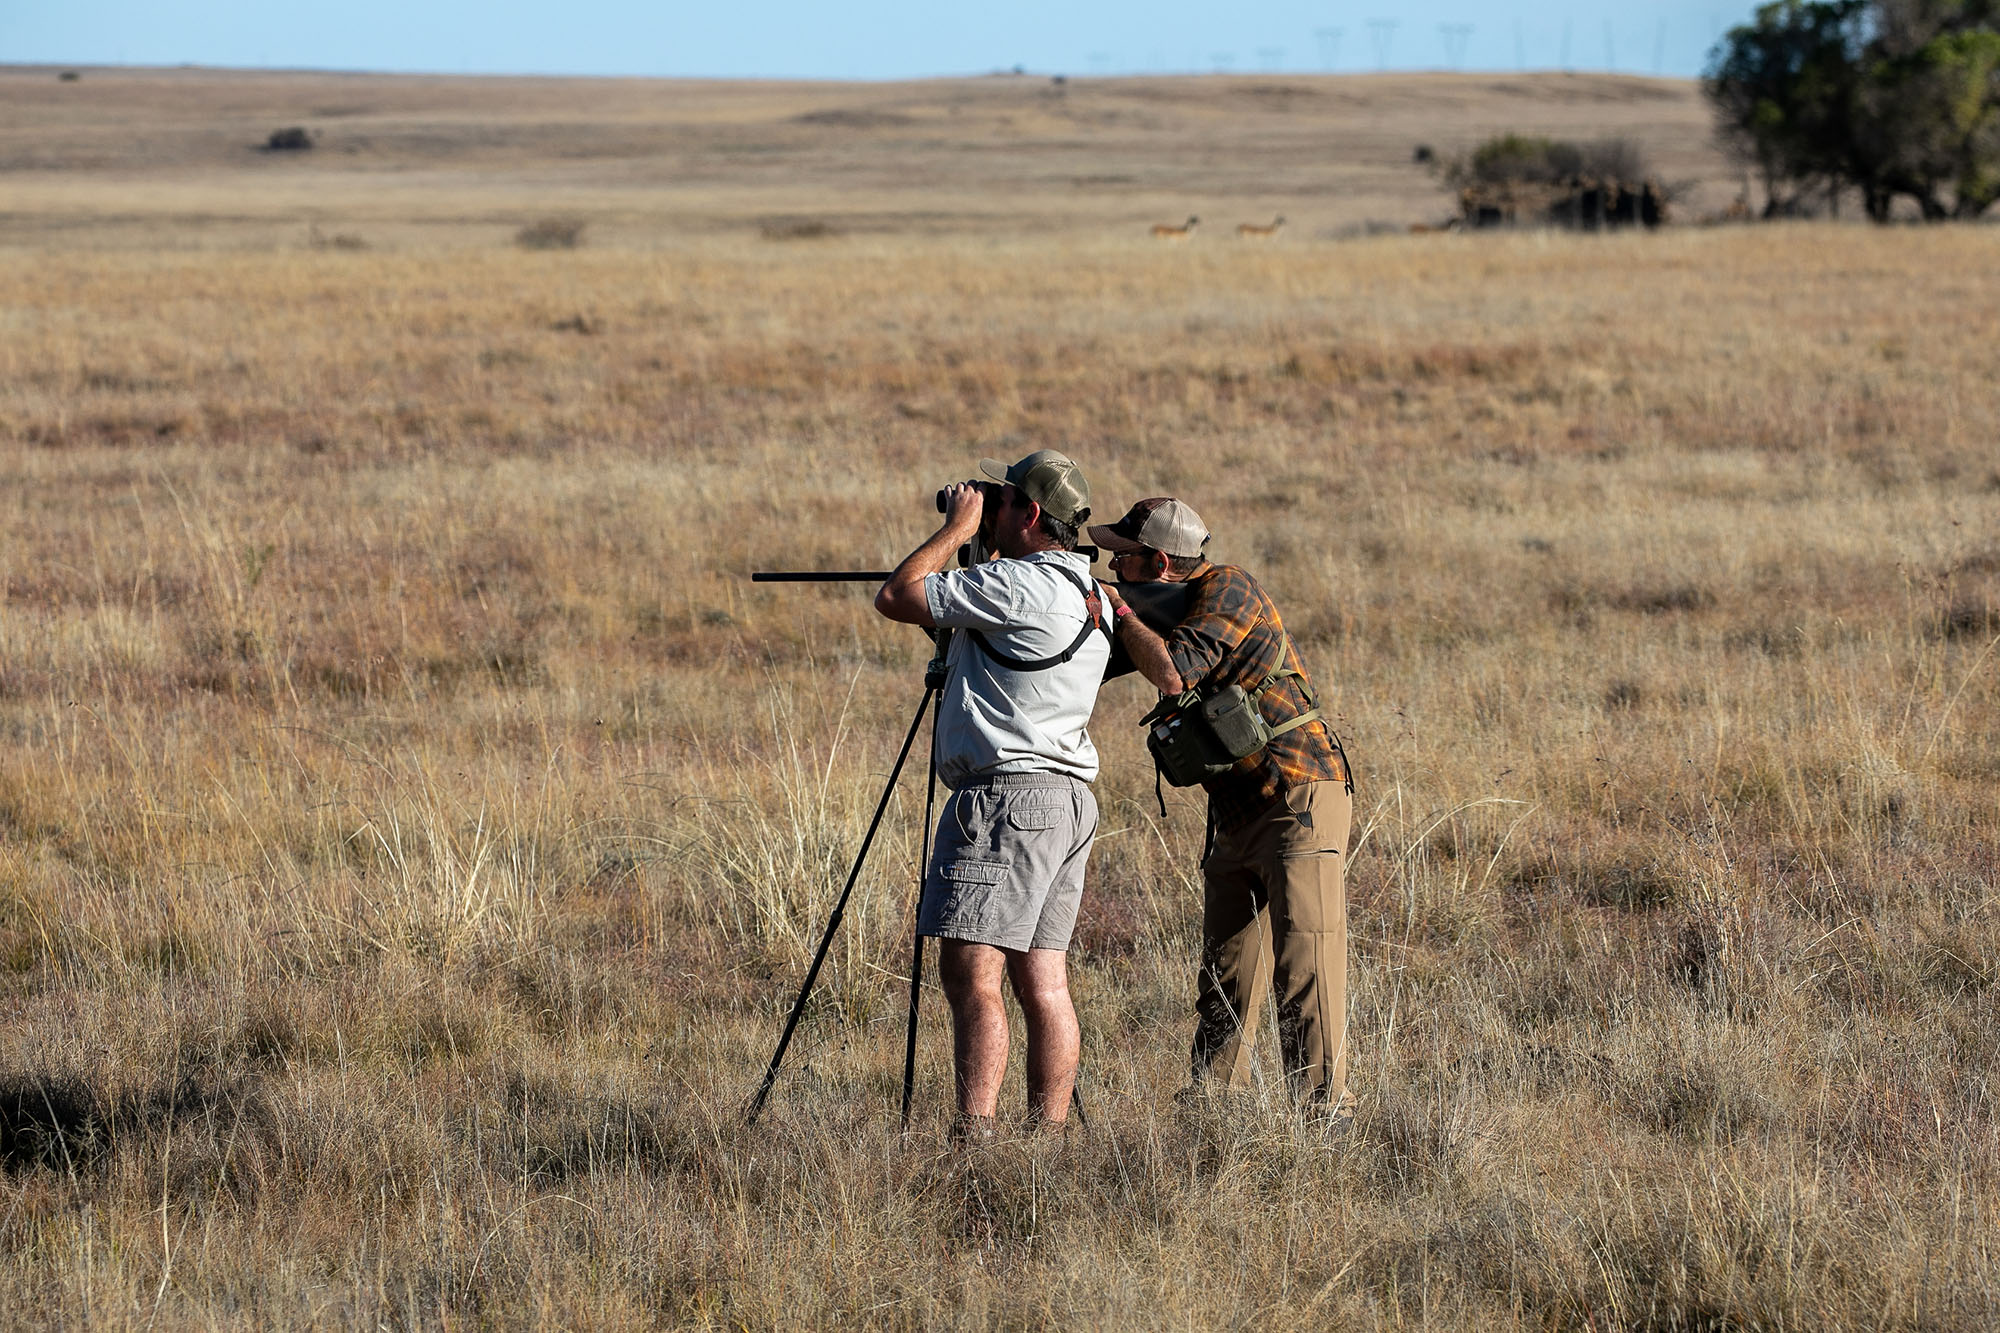 A hunter in South Africa on shooting sticks while his PH spots.